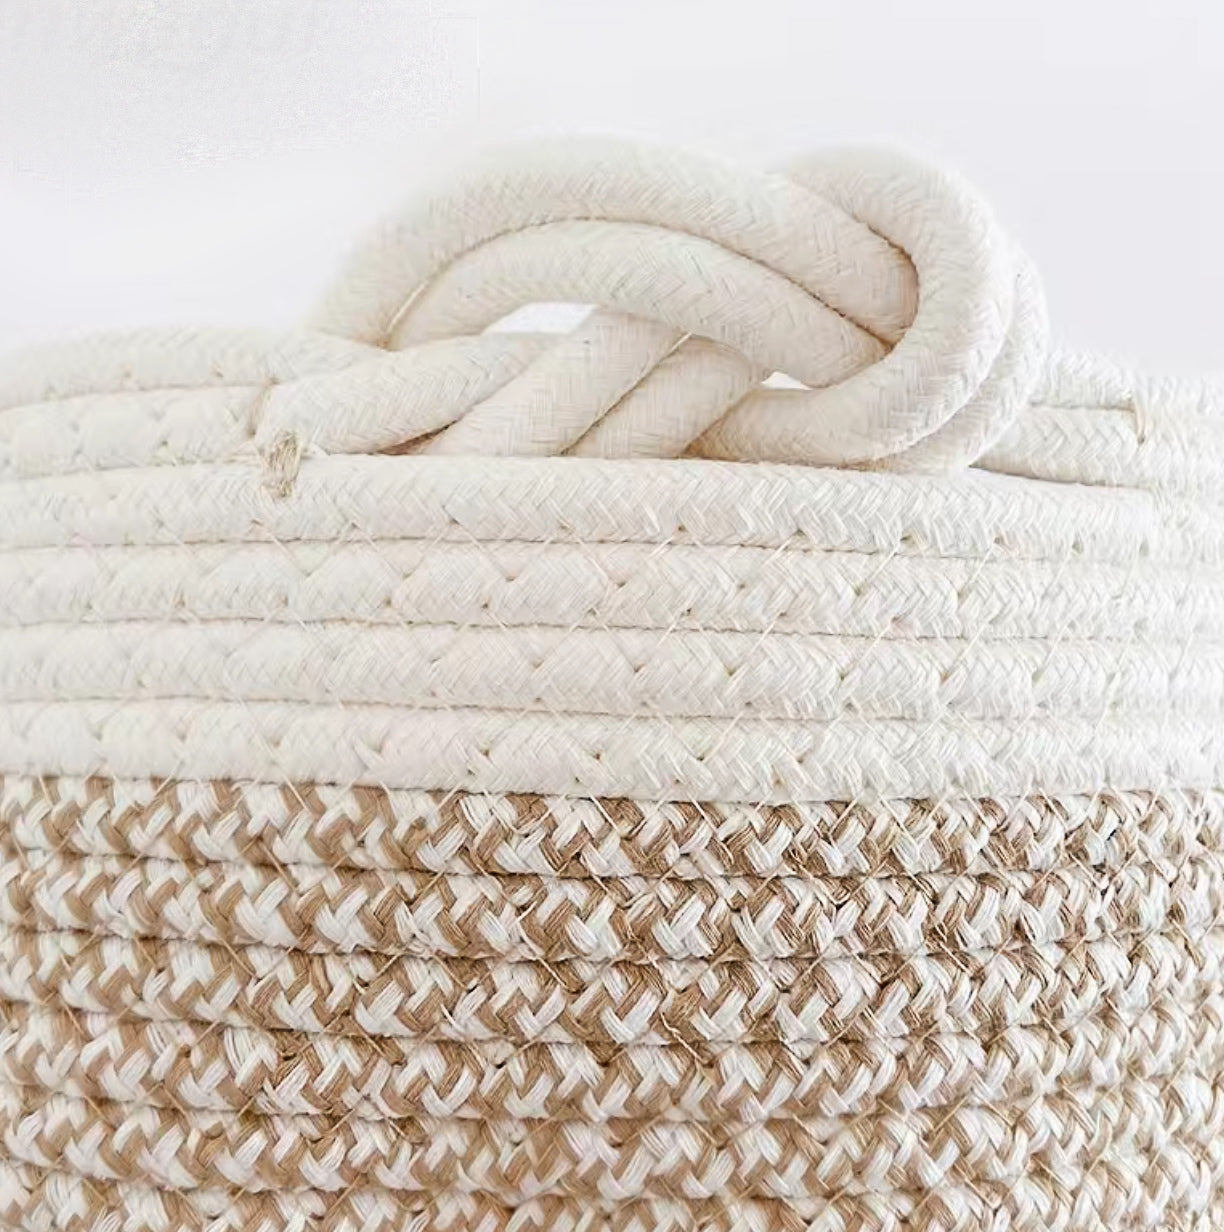 Small Braided Rope Round Baskets in Tan & White